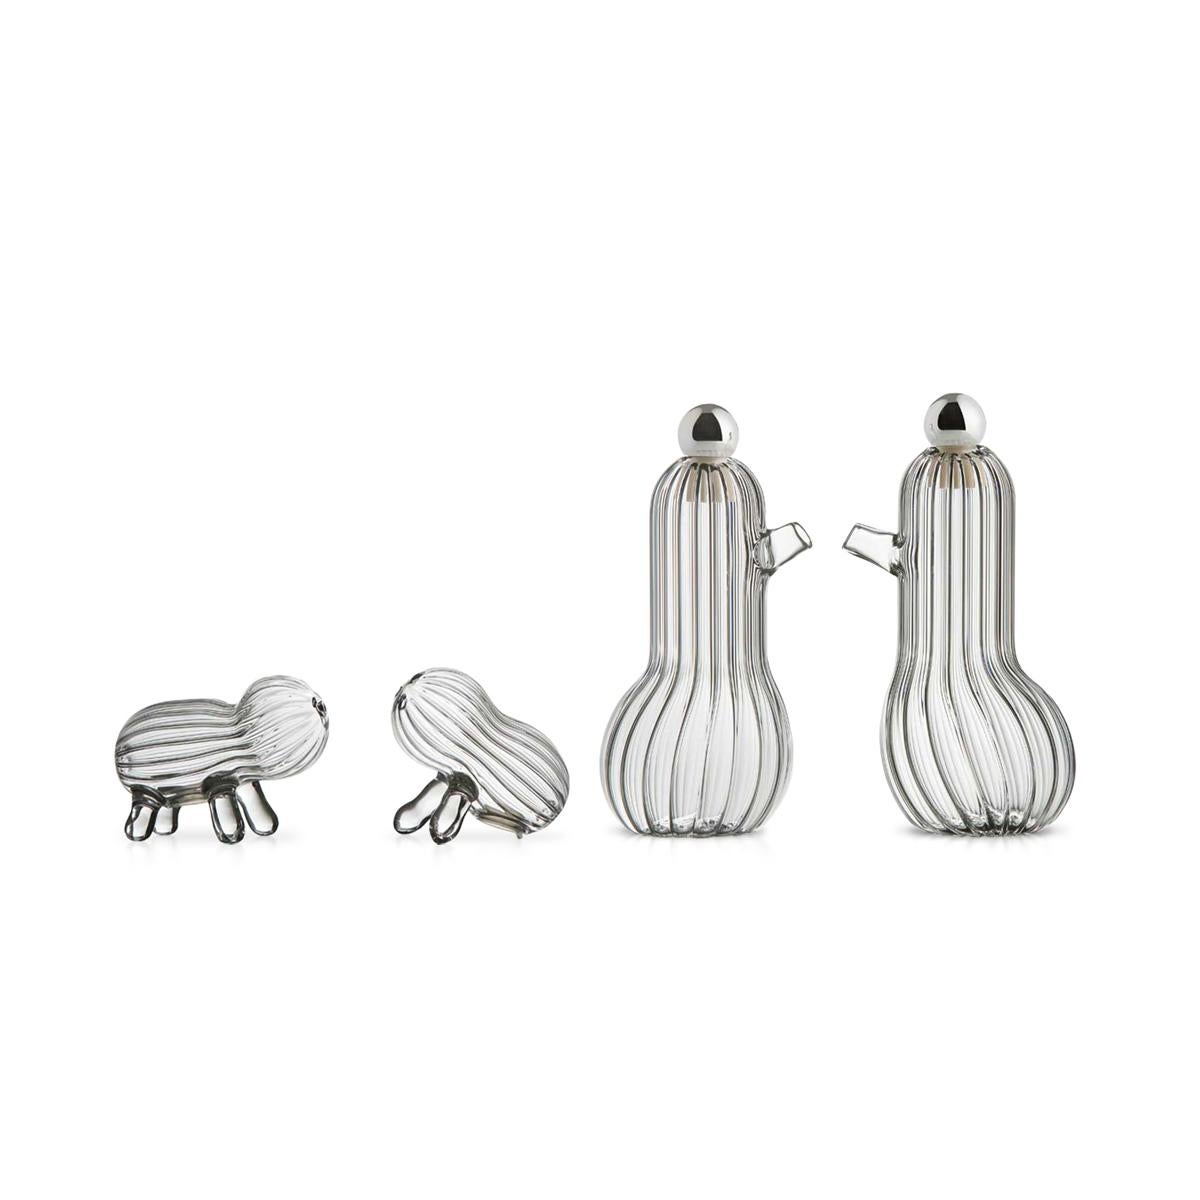 Italian Tipì and Tidò Salt and Pepper Shakers Set in Mouth Blown Glass by Matteo Cibic For Sale